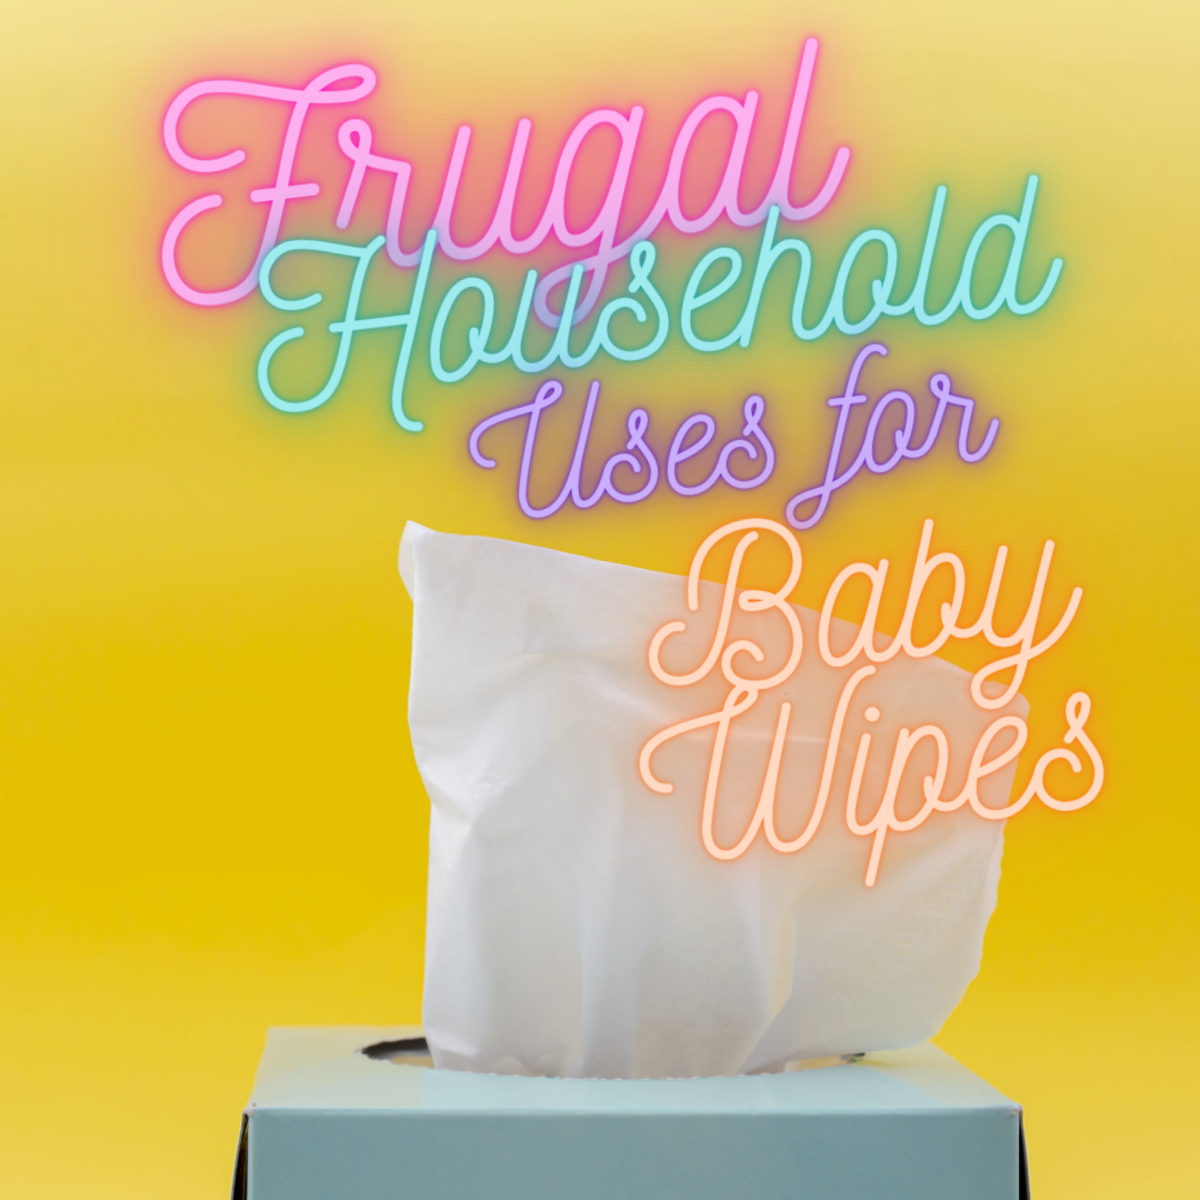 Baby wipes have many uses.